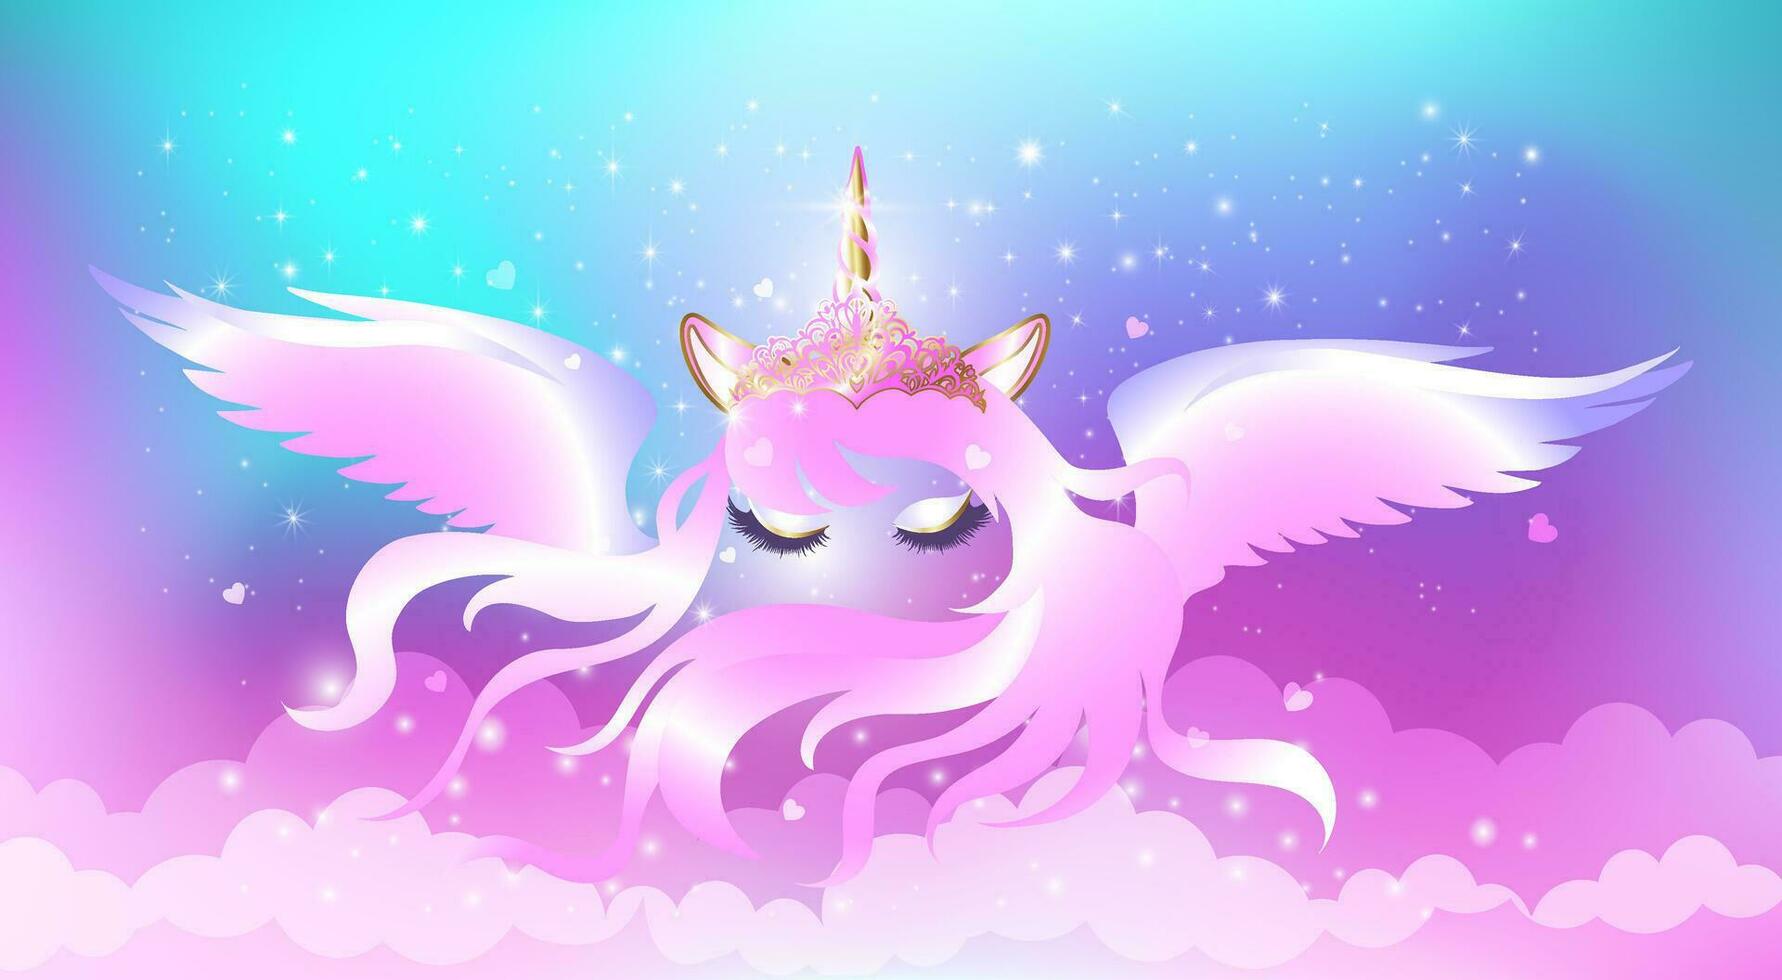 Face of a unicorn with closed eyes and a long mane on an iridescent pink-blue background with sparkles and stars. vector